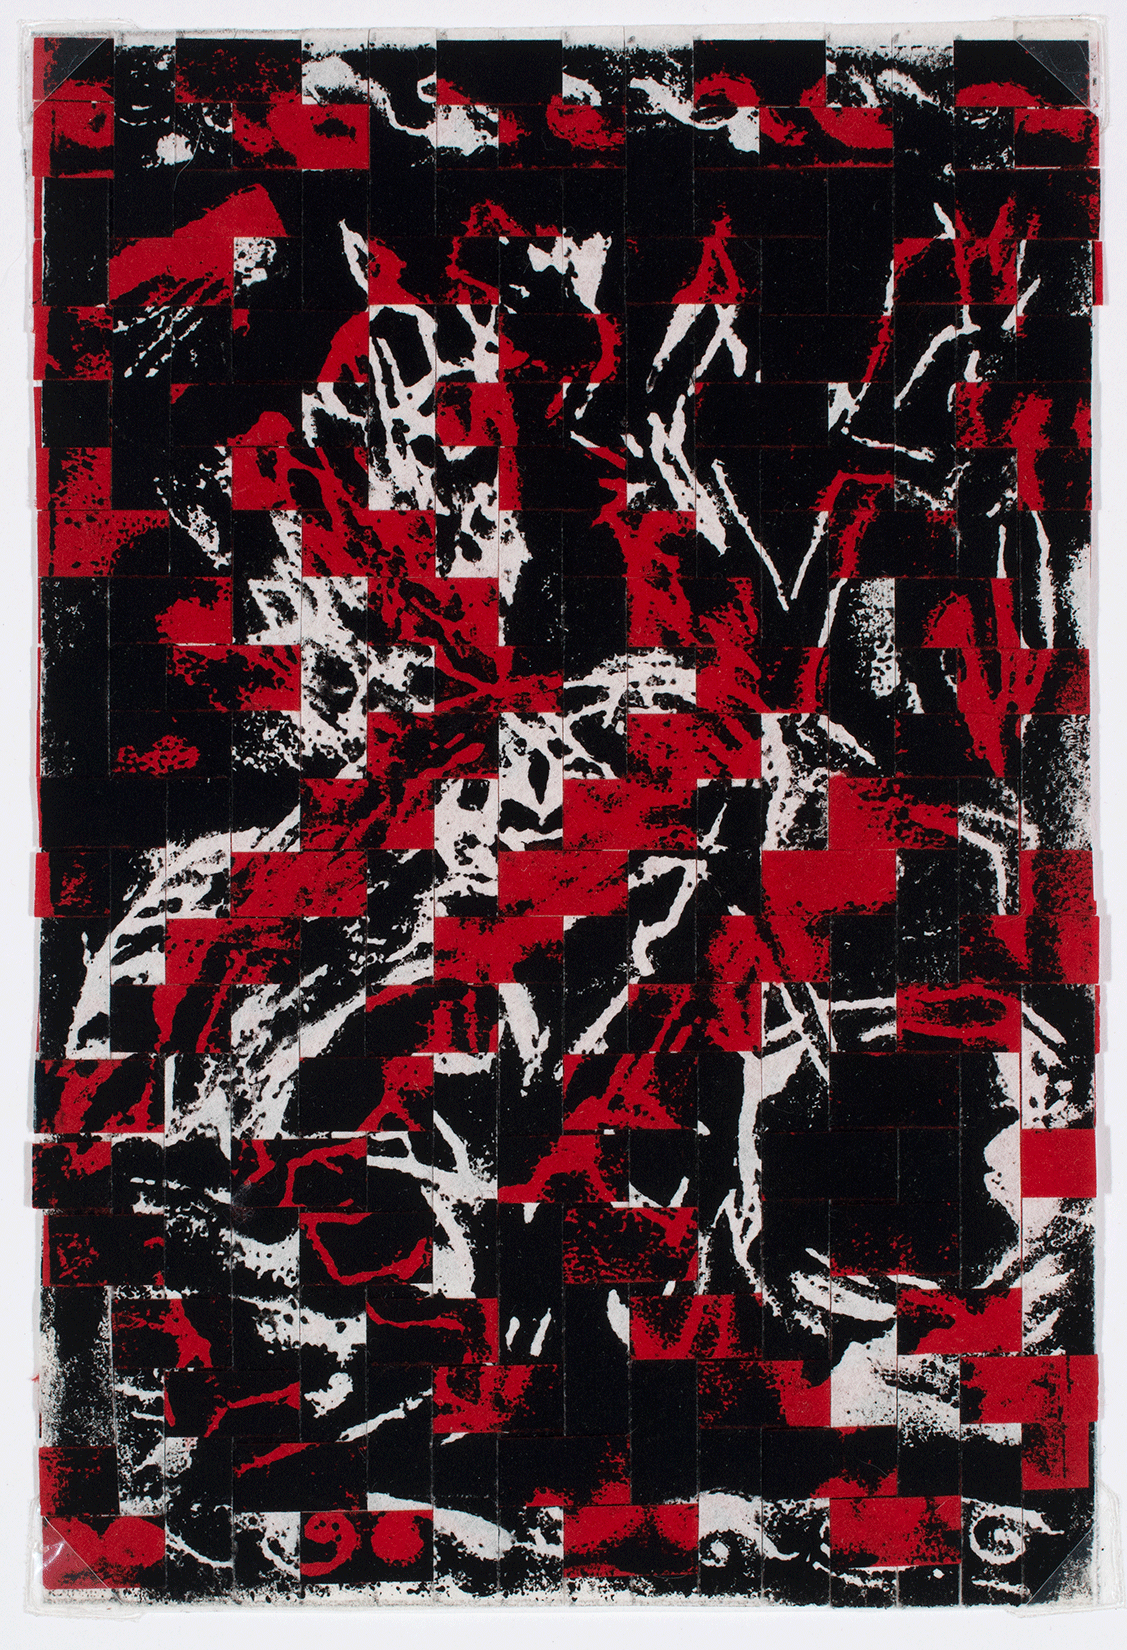 Gail-Skudera Sparks-Fly 6x4 woven-block-print-on-paper